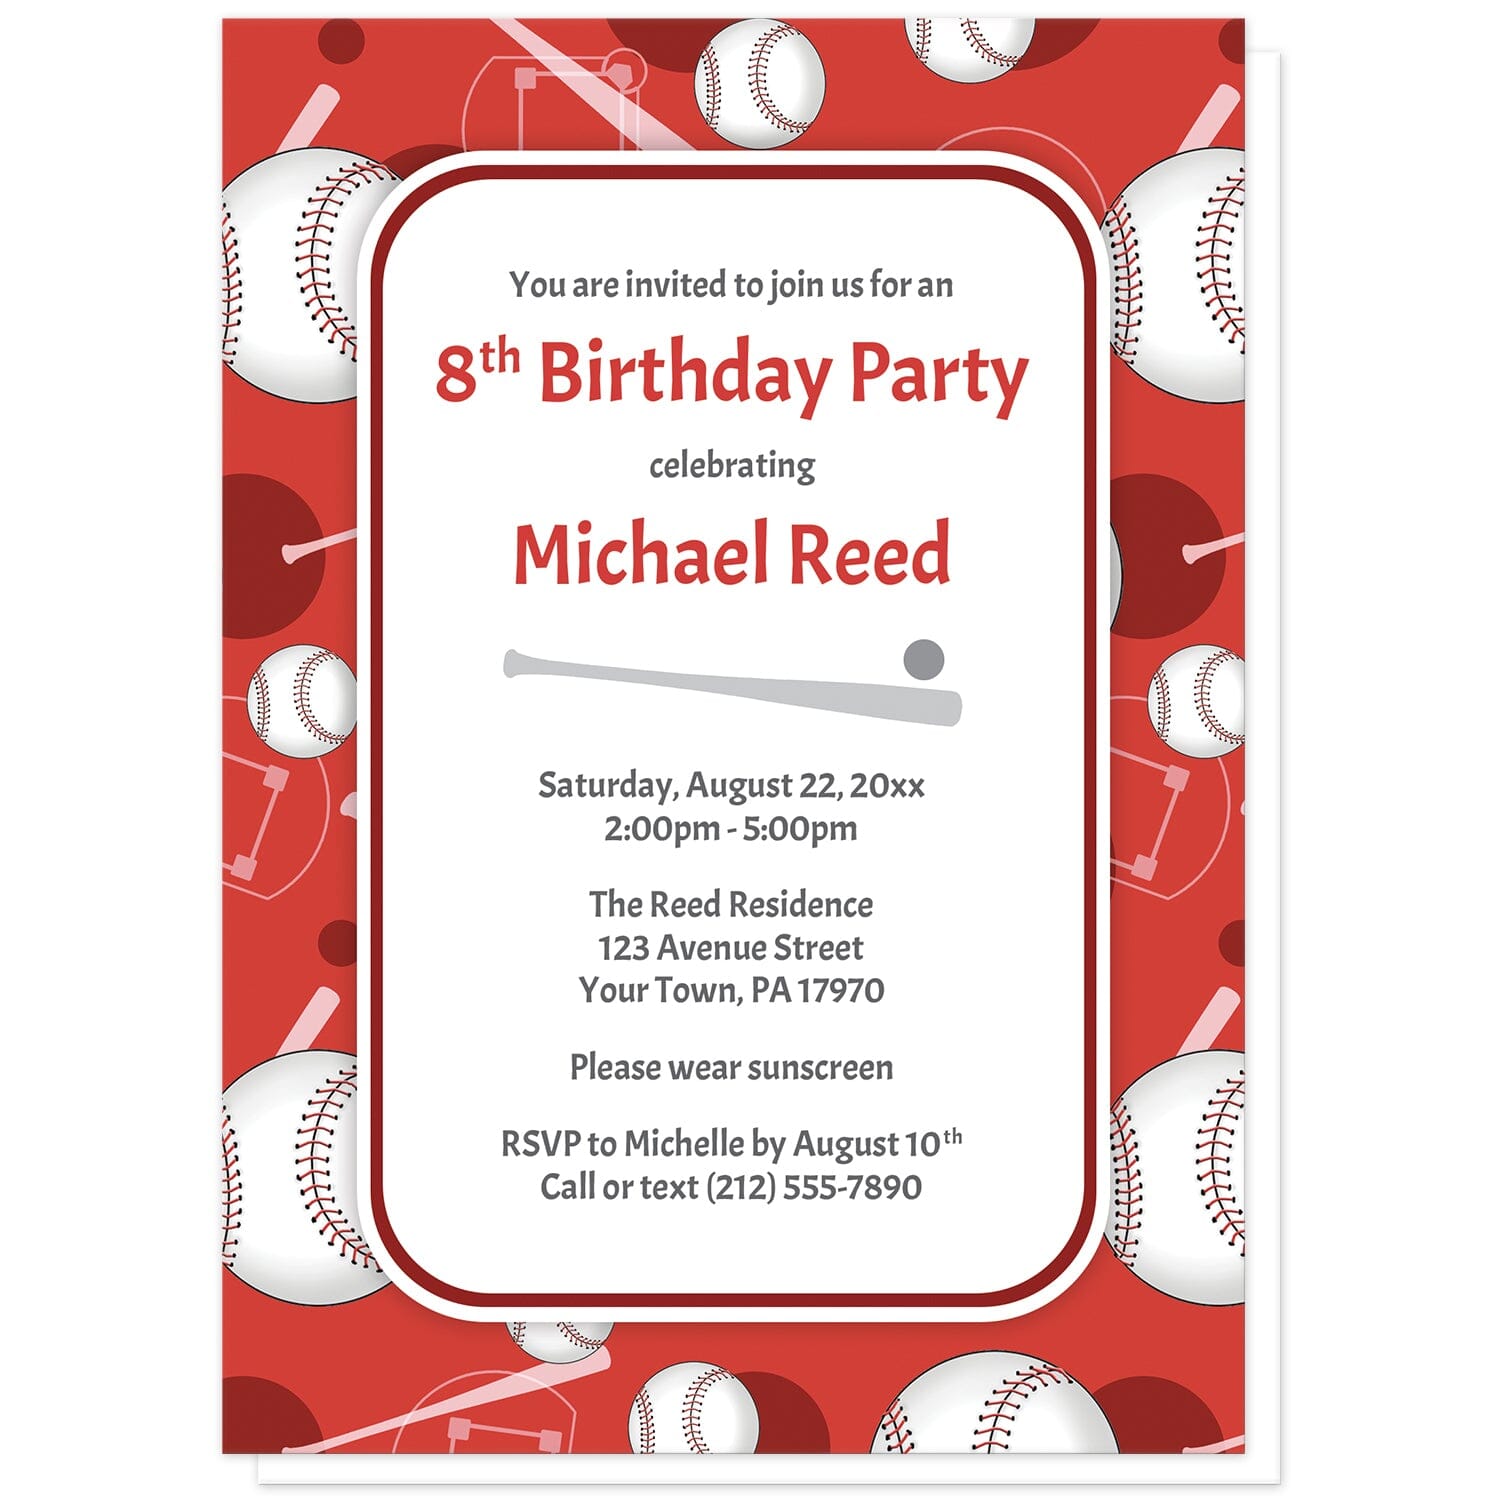 Baseball Themed Red Pattern Birthday Party Invitations at Artistically Invited. Baseball themed red pattern birthday party invitations for any age or milestone that are uniquely illustrated with a baseball pattern with baseballs, baseball bats, and baseball diamonds, over a red background color. Your personalized birthday party details are custom printed in red and gray over white in the center. 